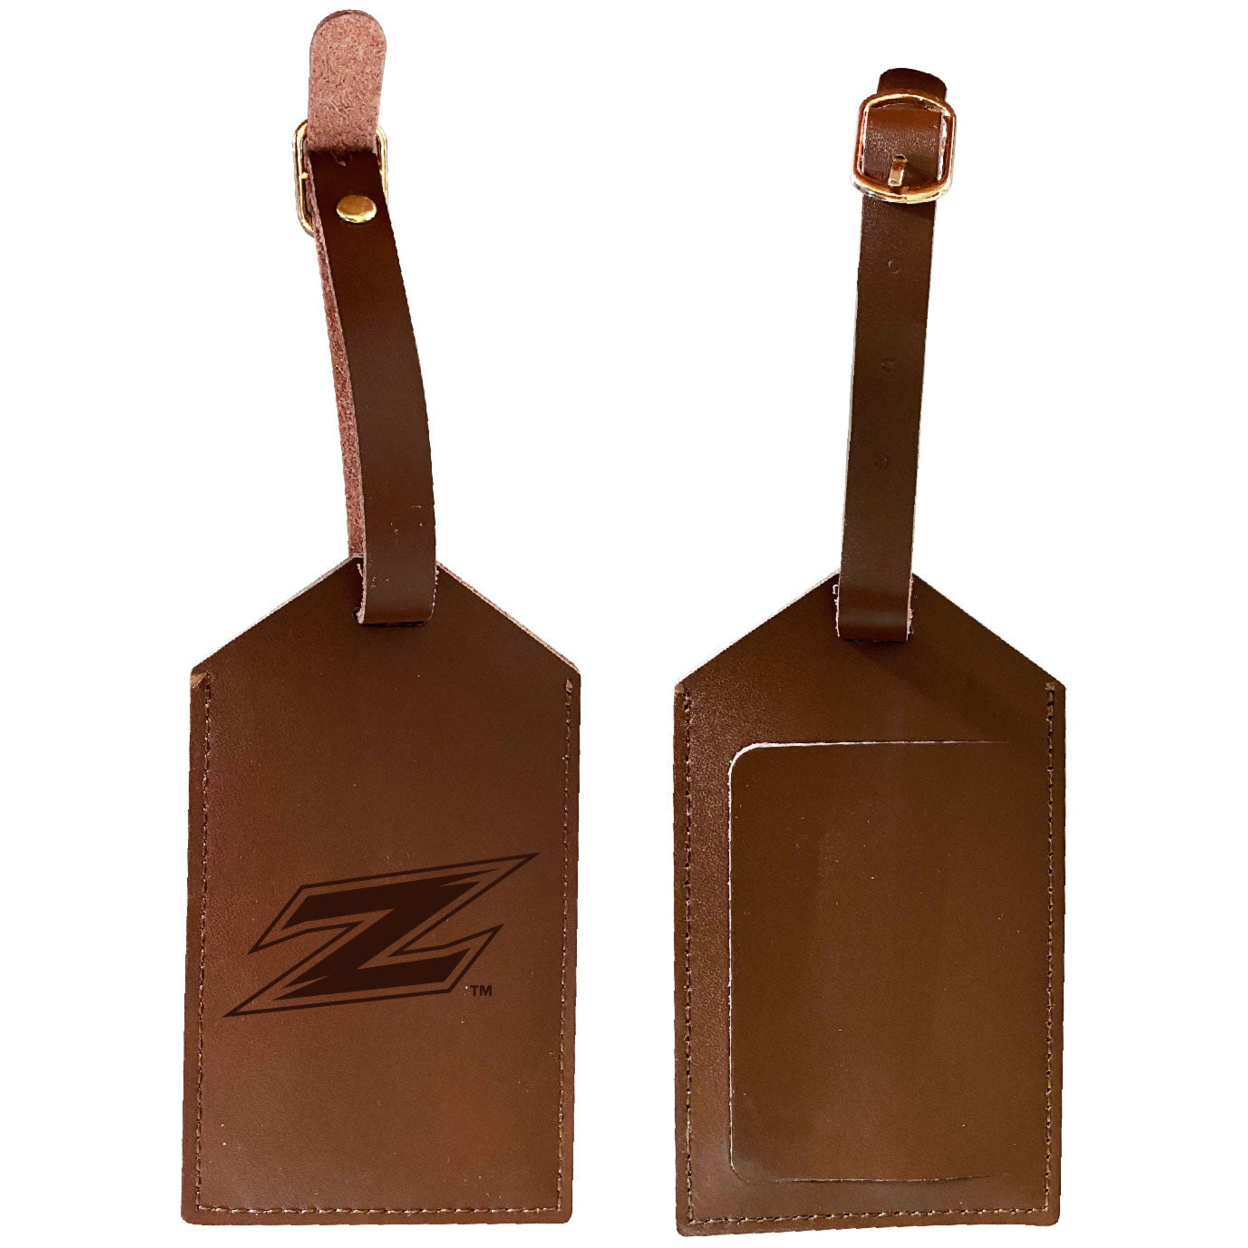 Akron Zips Leather Luggage Tag Engraved